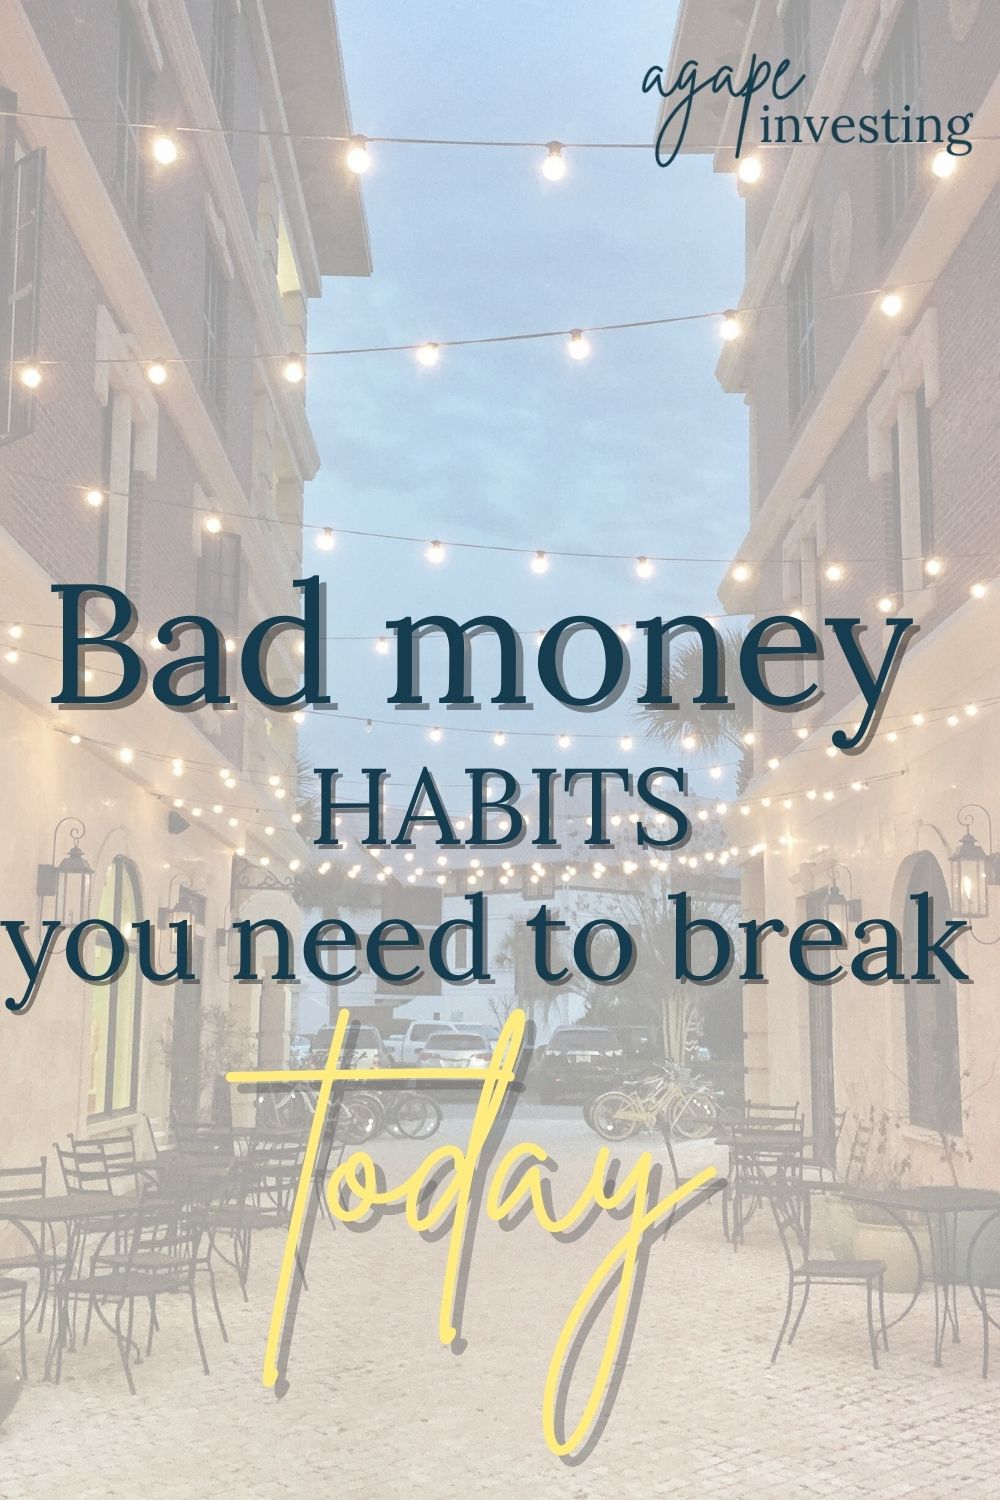 Are you sick of living paycheck to paycheck? You may be falling prey to one of these 13 bad money habits. Find out if you have any of them and how you can break these bad financial habits. Let's take control of our finances and start going down the path towards financial independence. #badmoneyhabits #financialindependence #moneyhabits #budgeting 